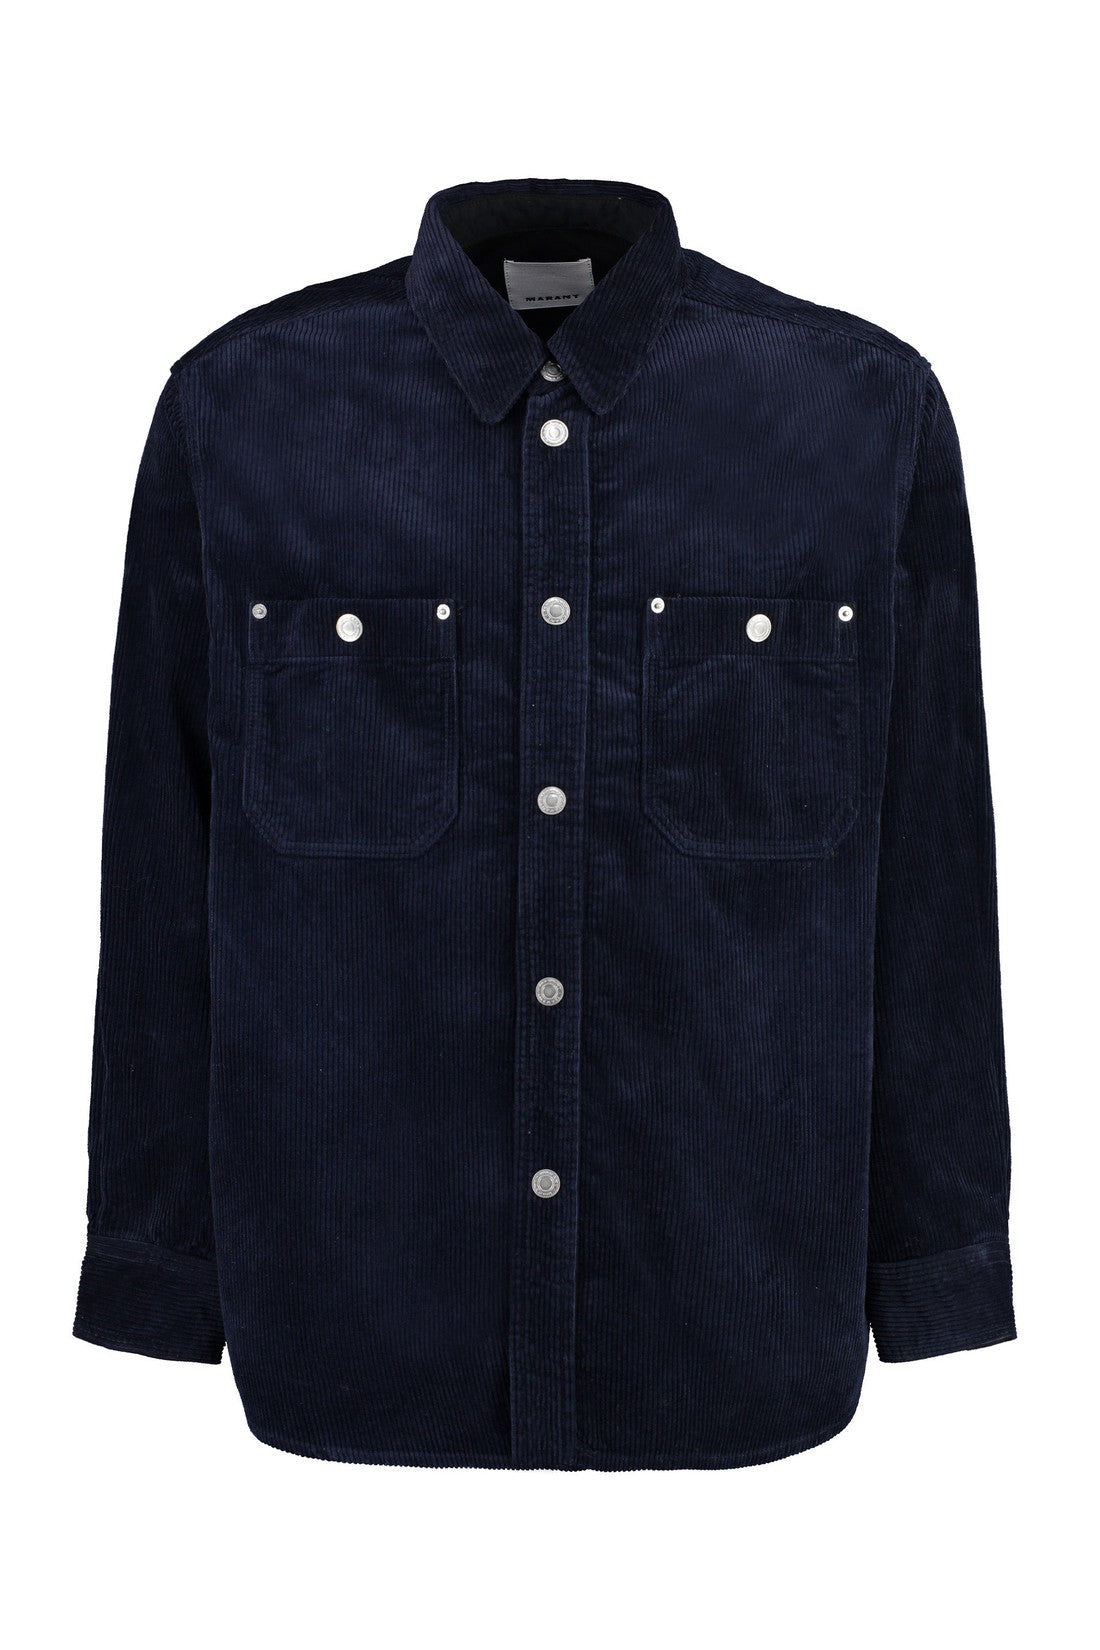 Isabel Marant-OUTLET-SALE-Ritchie wool overshirt-ARCHIVIST